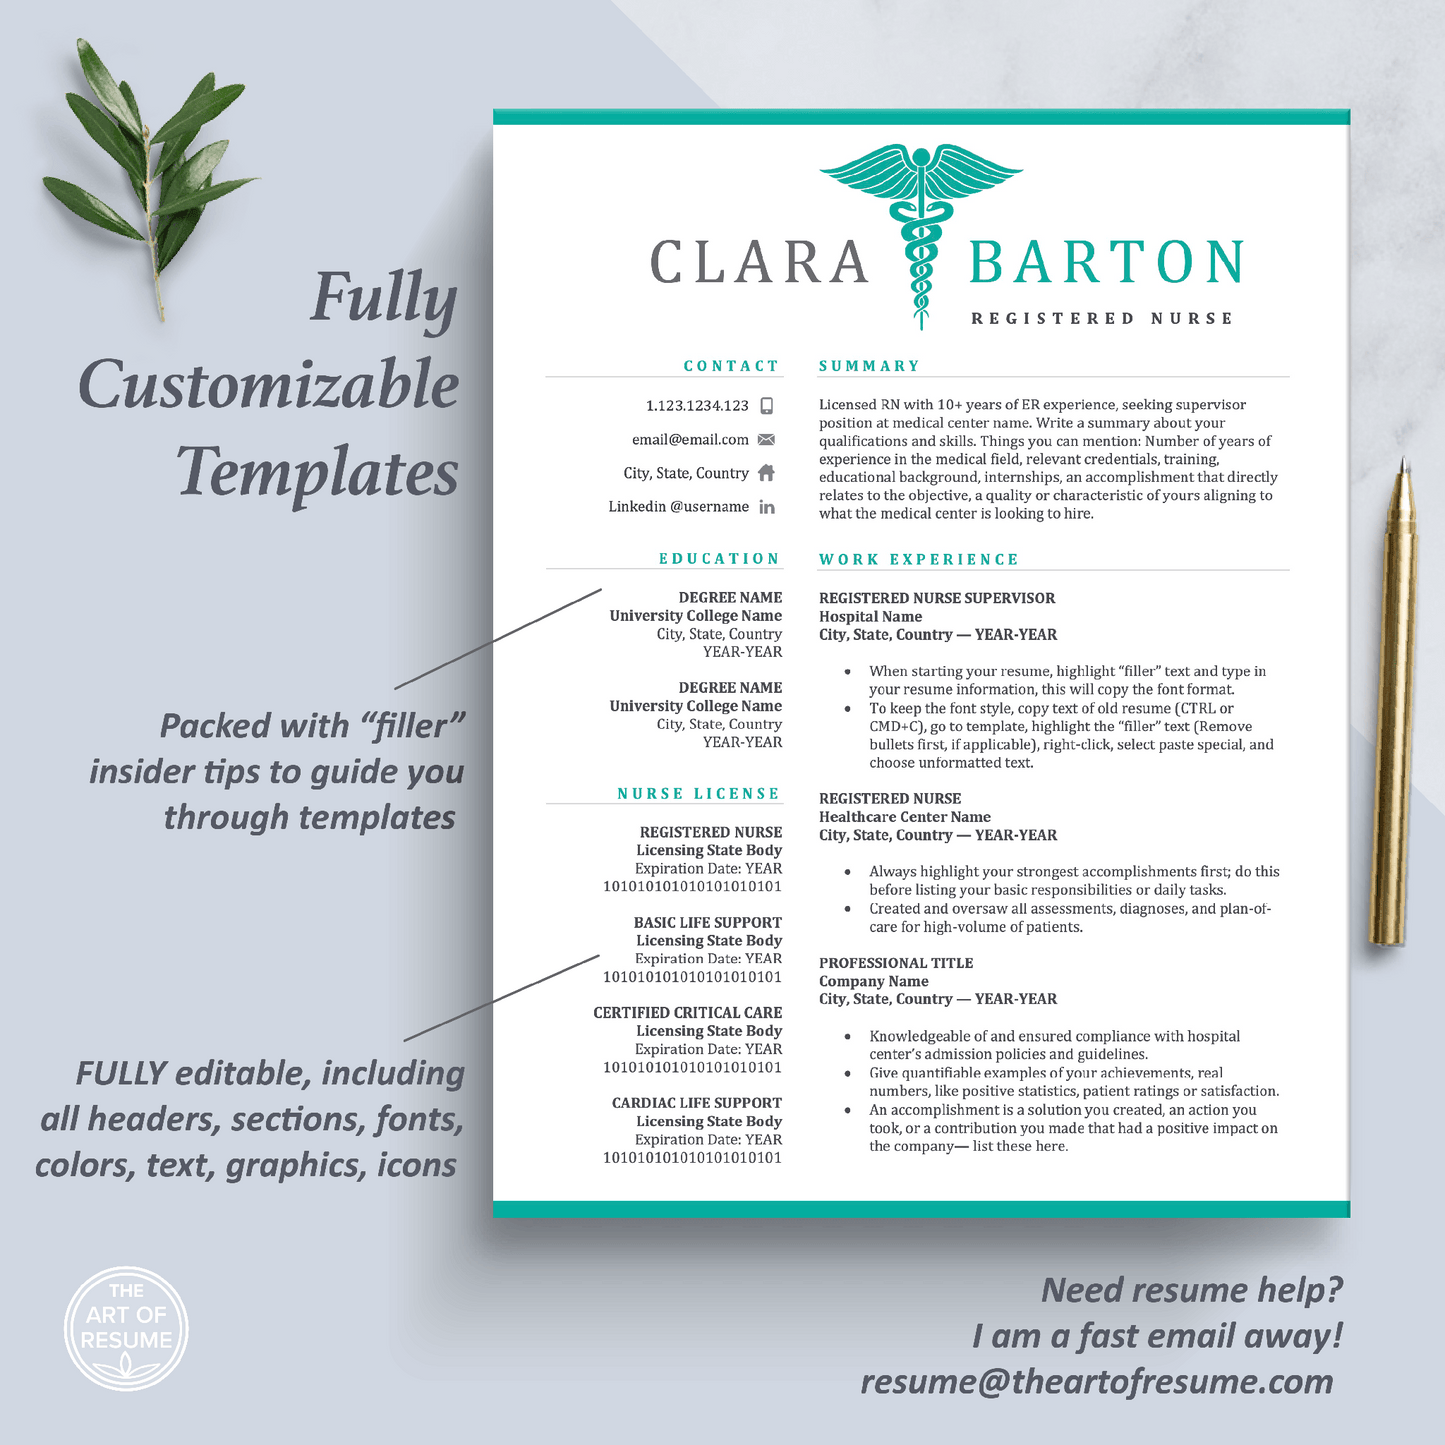 The Art of Resume Templates | One Page Professional Nurse Doctor Medical Resume CV Design Template Maker | Curriculum Vitae